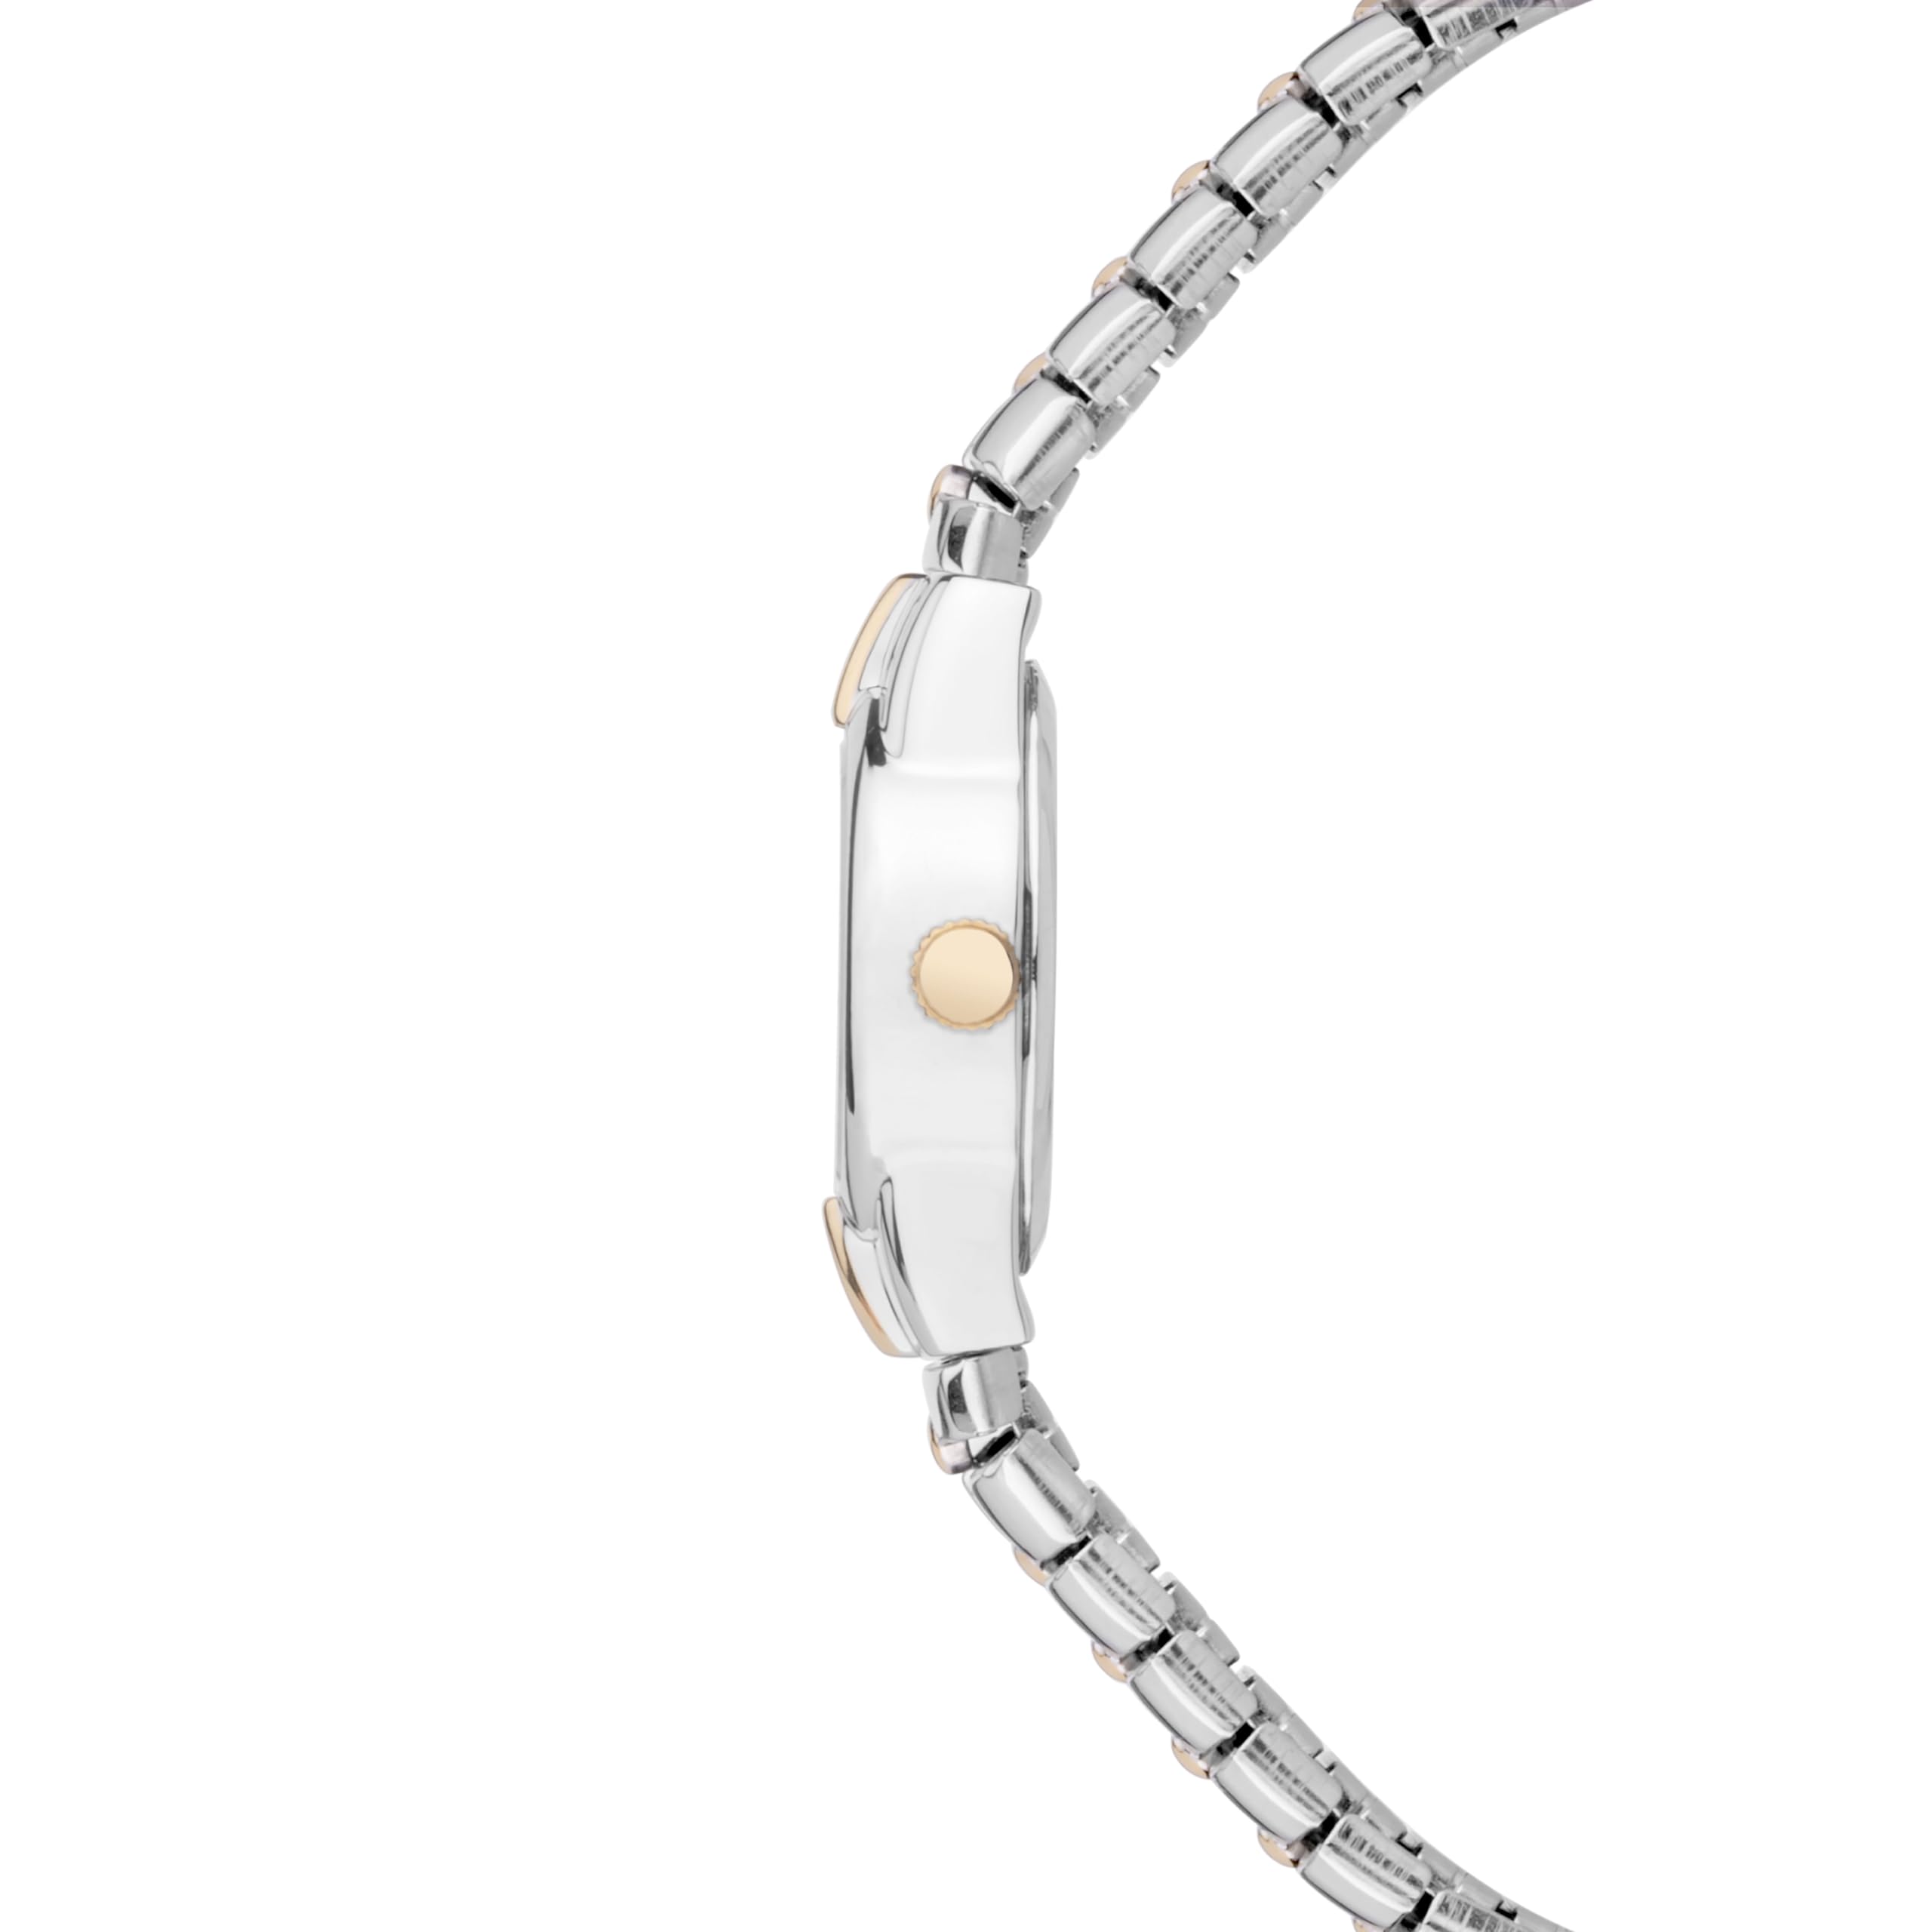 Sekonda Newton 19mm Womens Classic Analogue Quartz Watch with White Dial Mineral Glass and Two Tone Gold Silver Stainless Steel Expander Bracelet